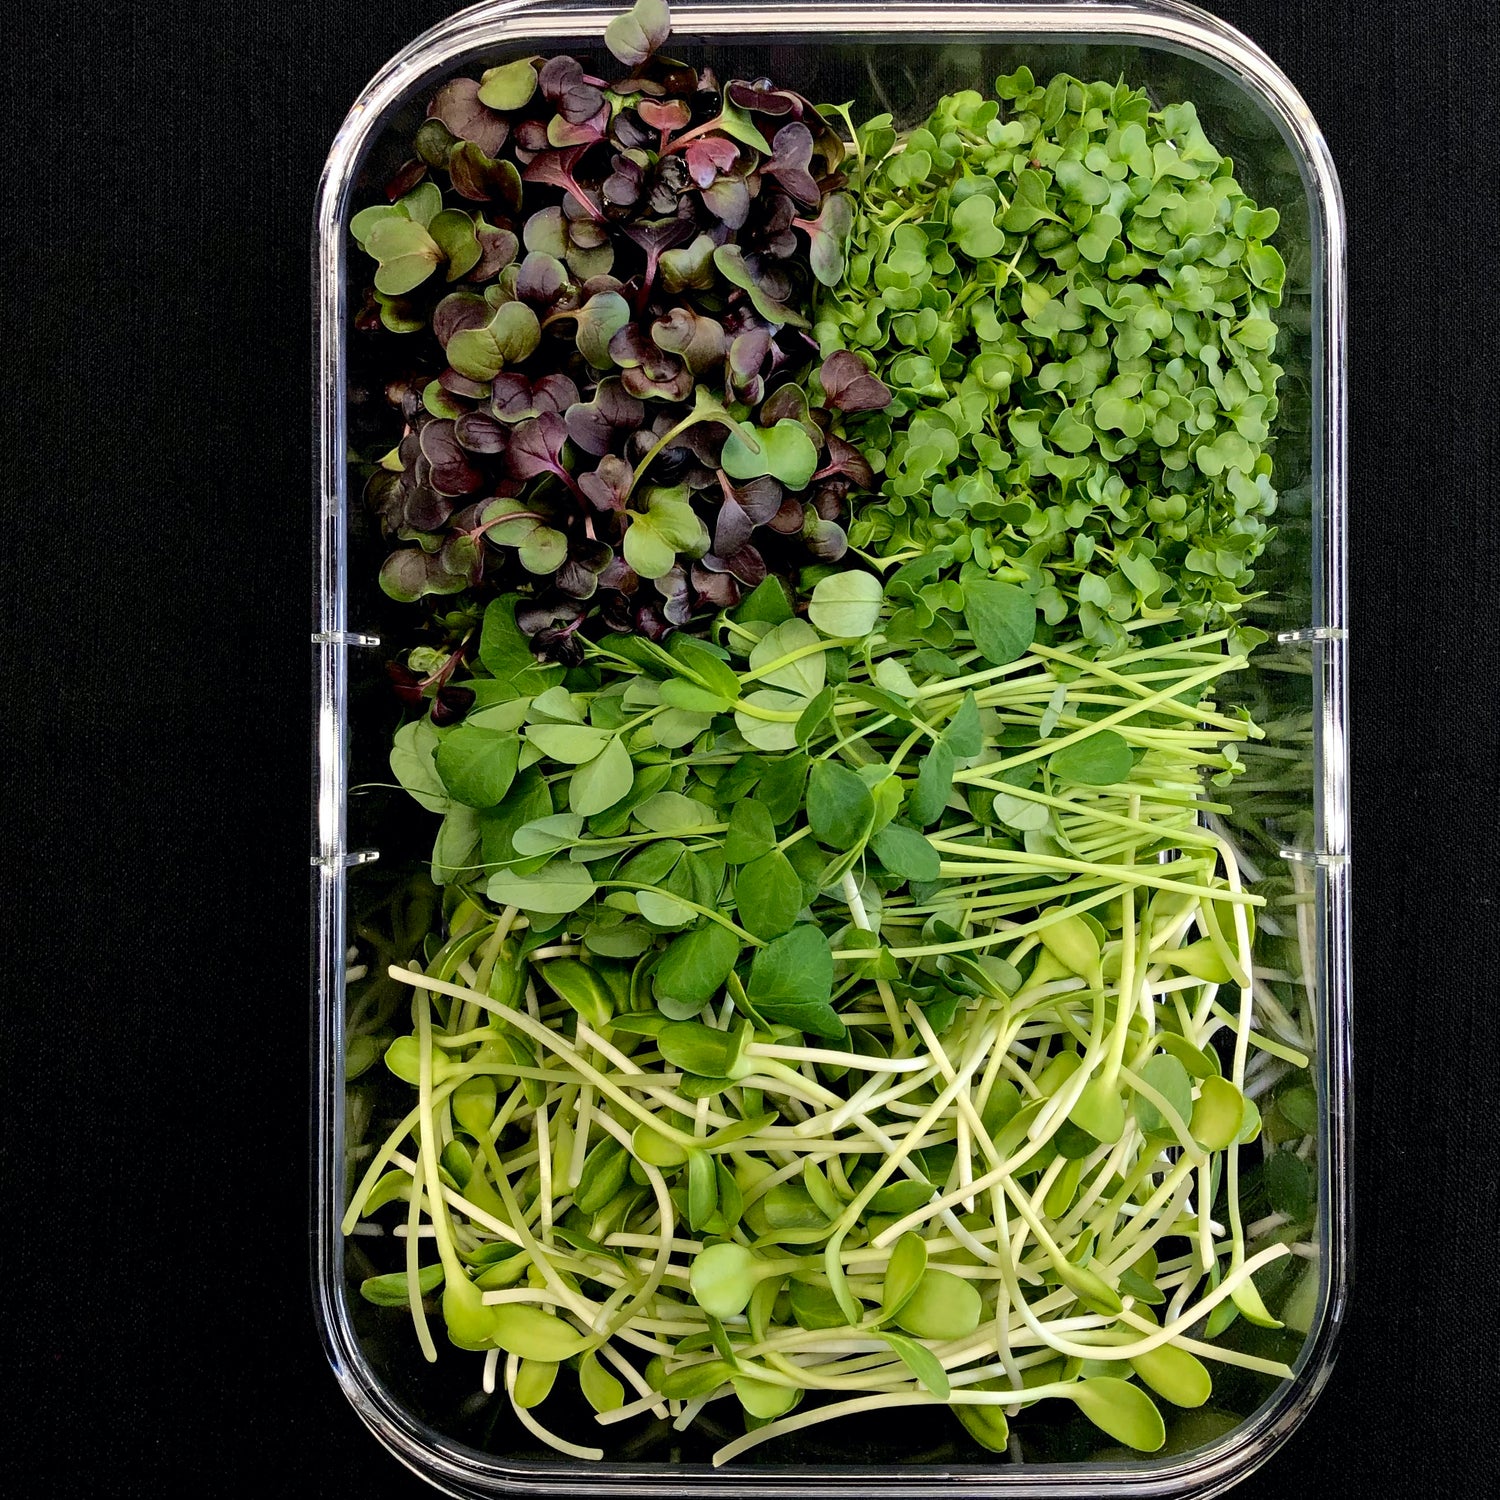 Seaside Sampler is a large box which houses 4 microgreen varietals including broccoli, radish, sweet pea and sunflower. Broccoli has green heart shaped leaves, radish has purple and green heart shaped leaves, sweet pea has long slender stems with oval leaves and tendrils, and sunflowers have long thick stems with green oval leaves.